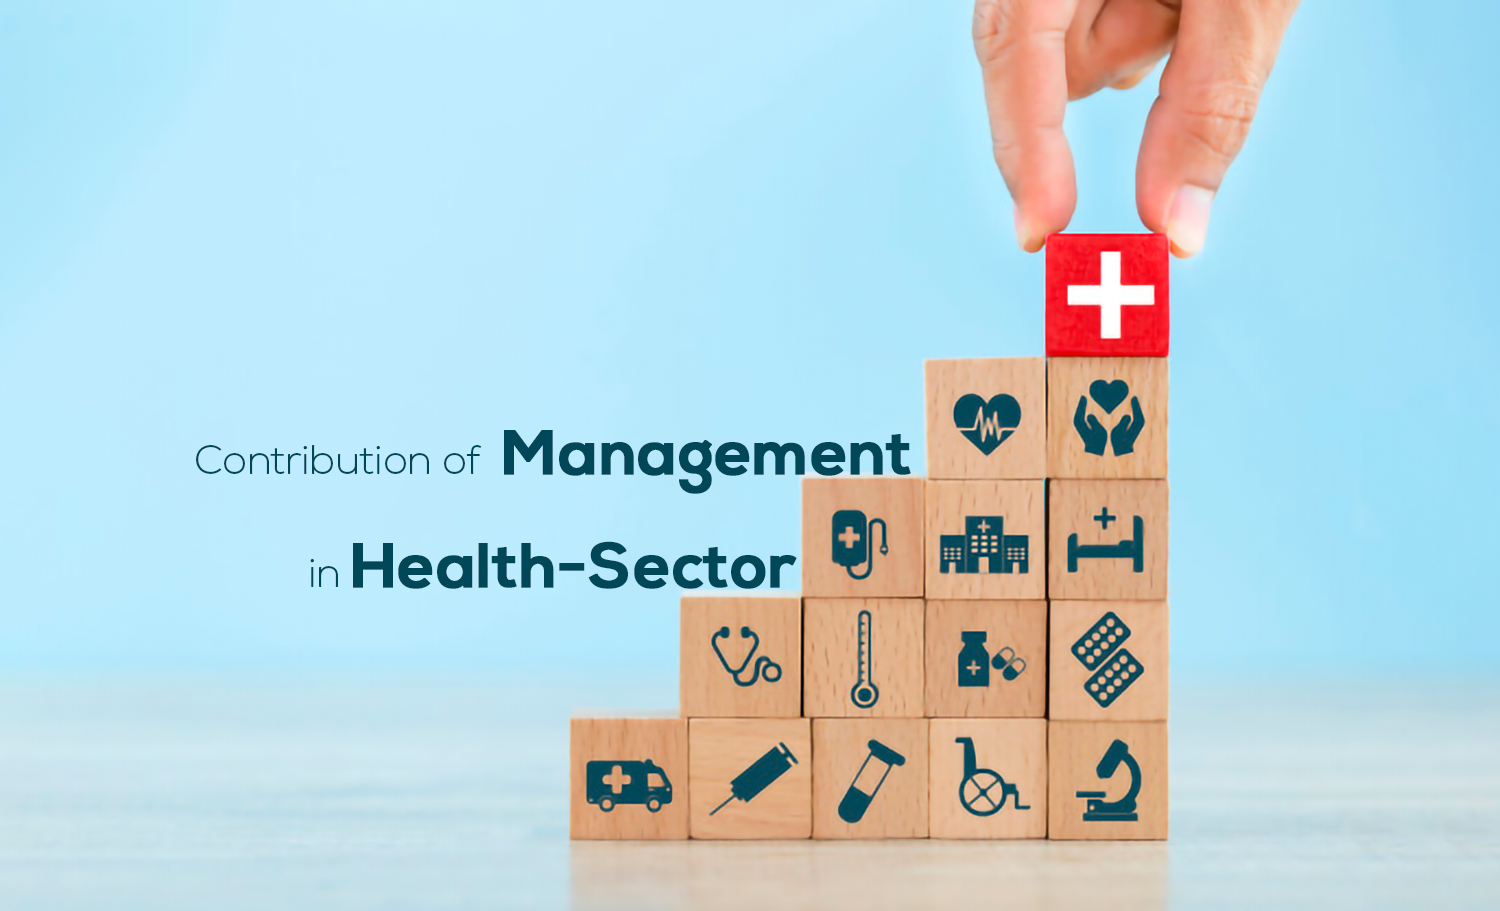 Contribution of Management in Health-Sector